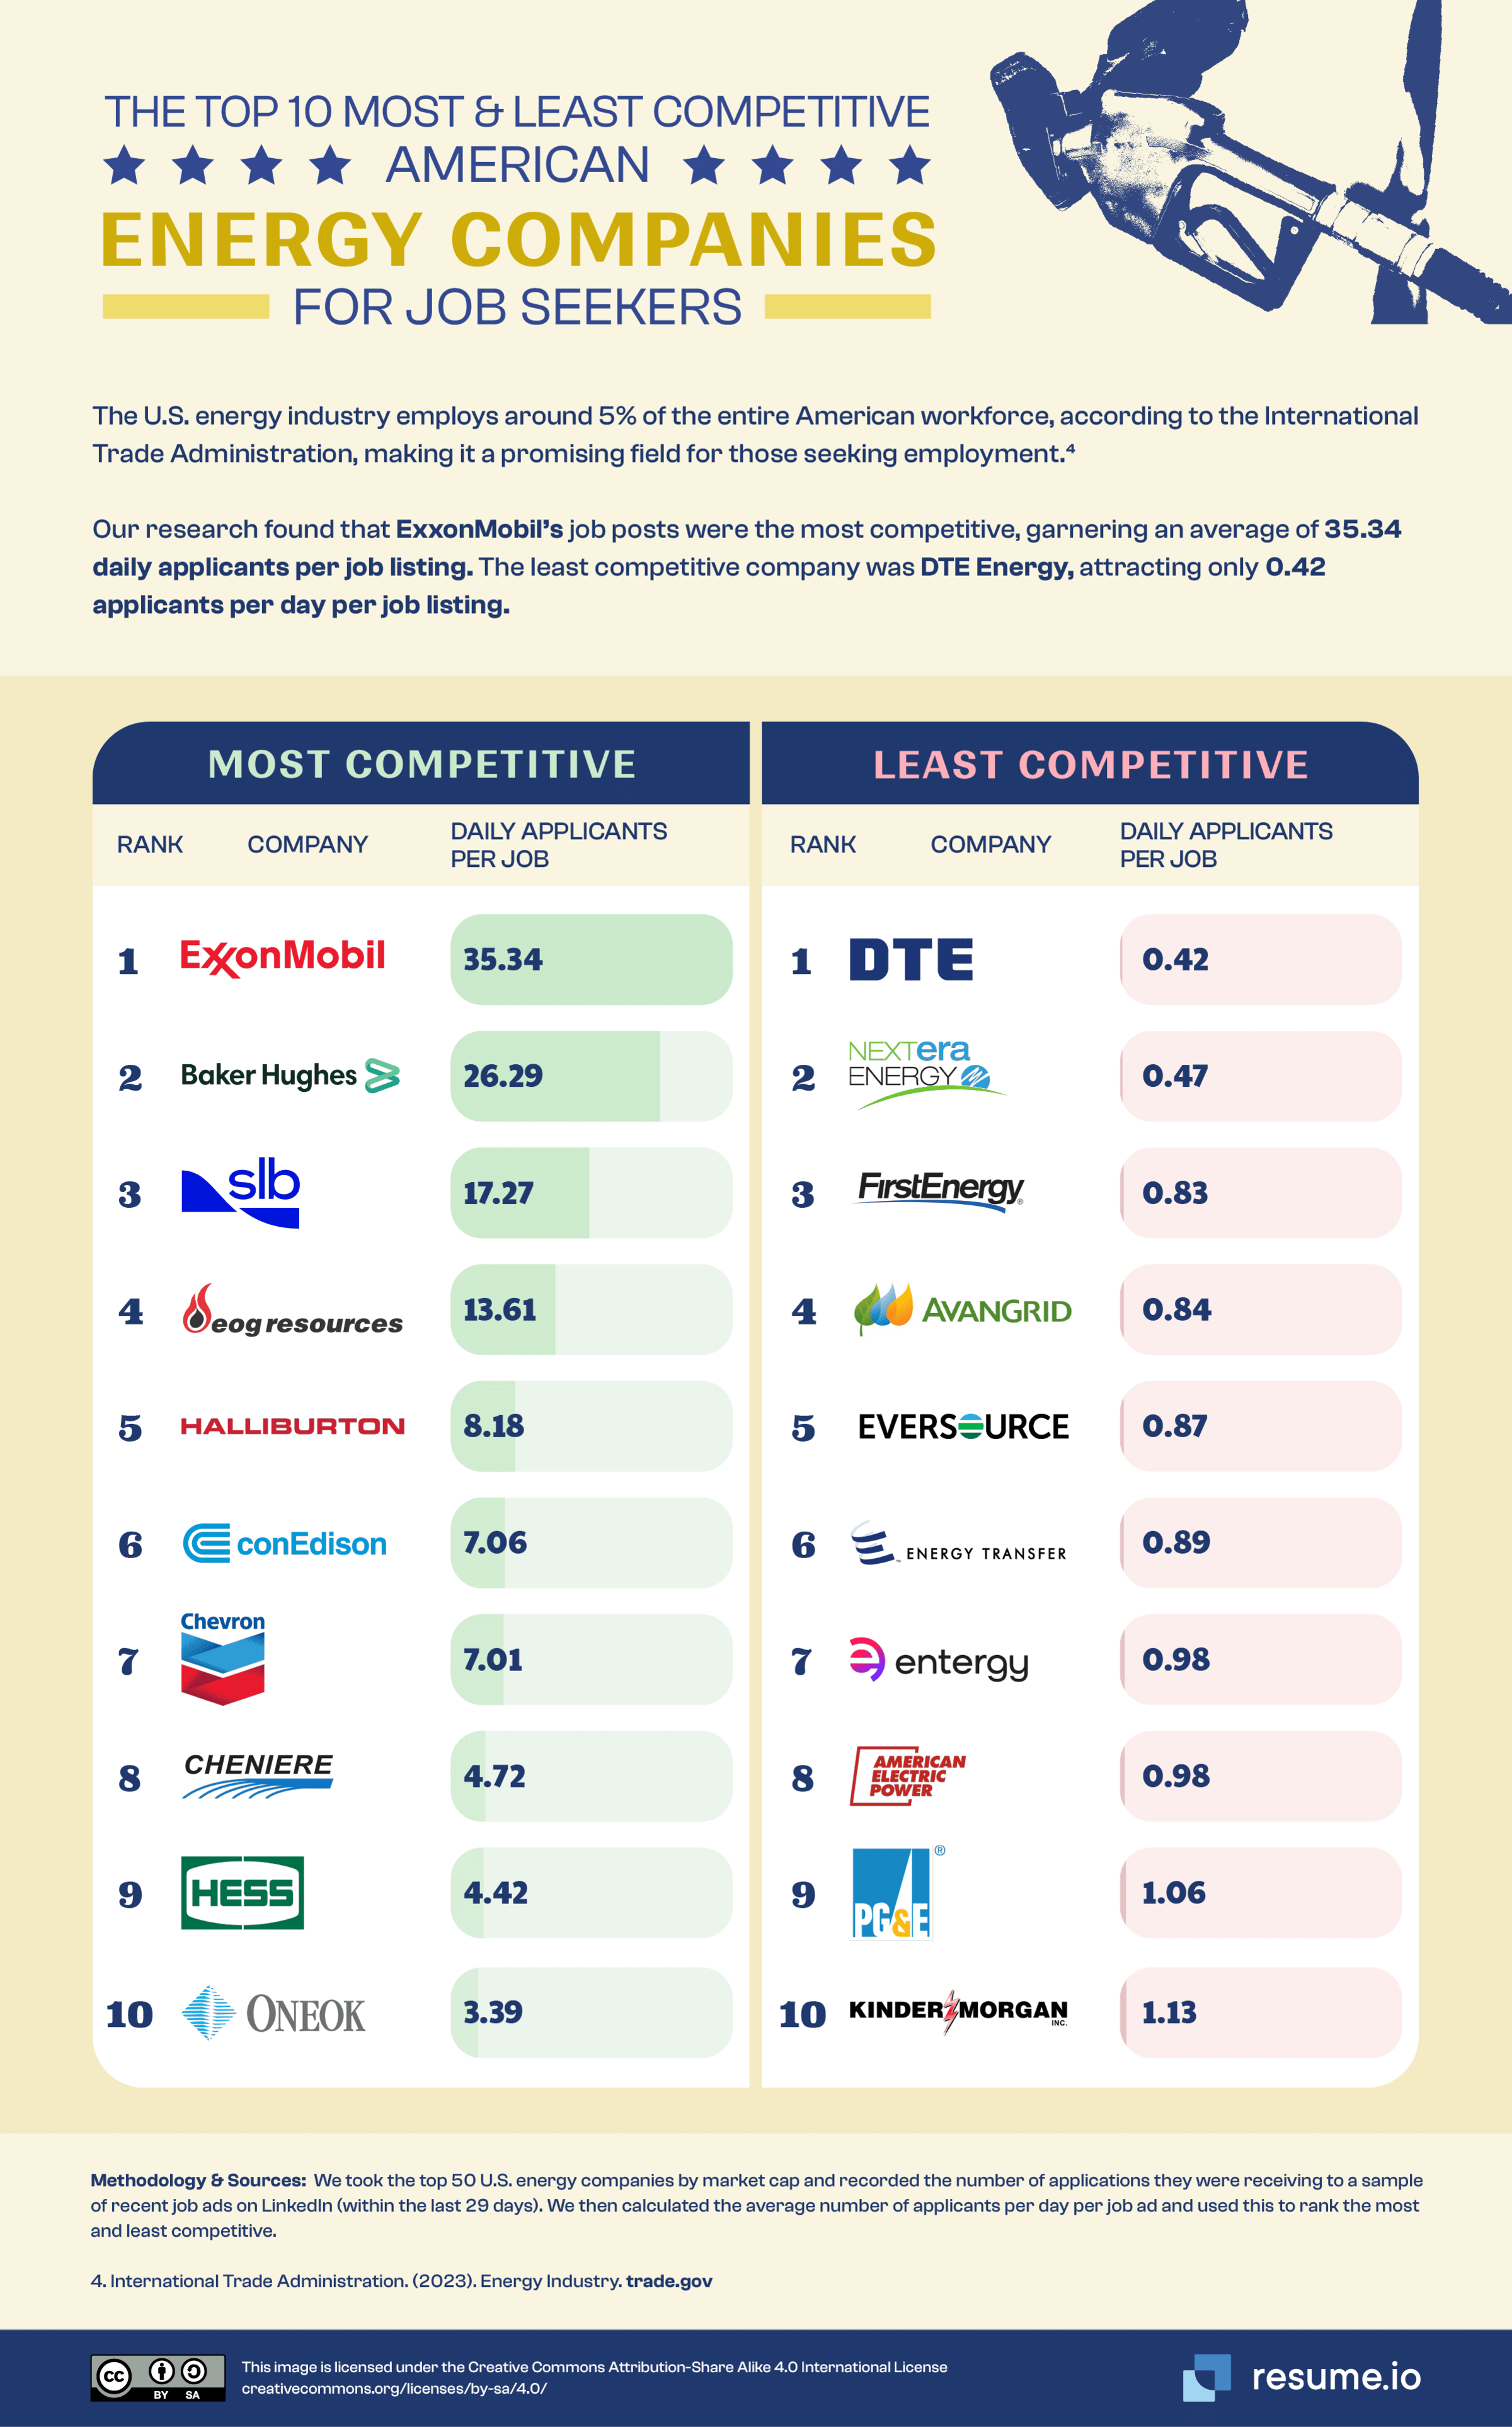 Most and Least Competitive Energy Companies for Job Seekers